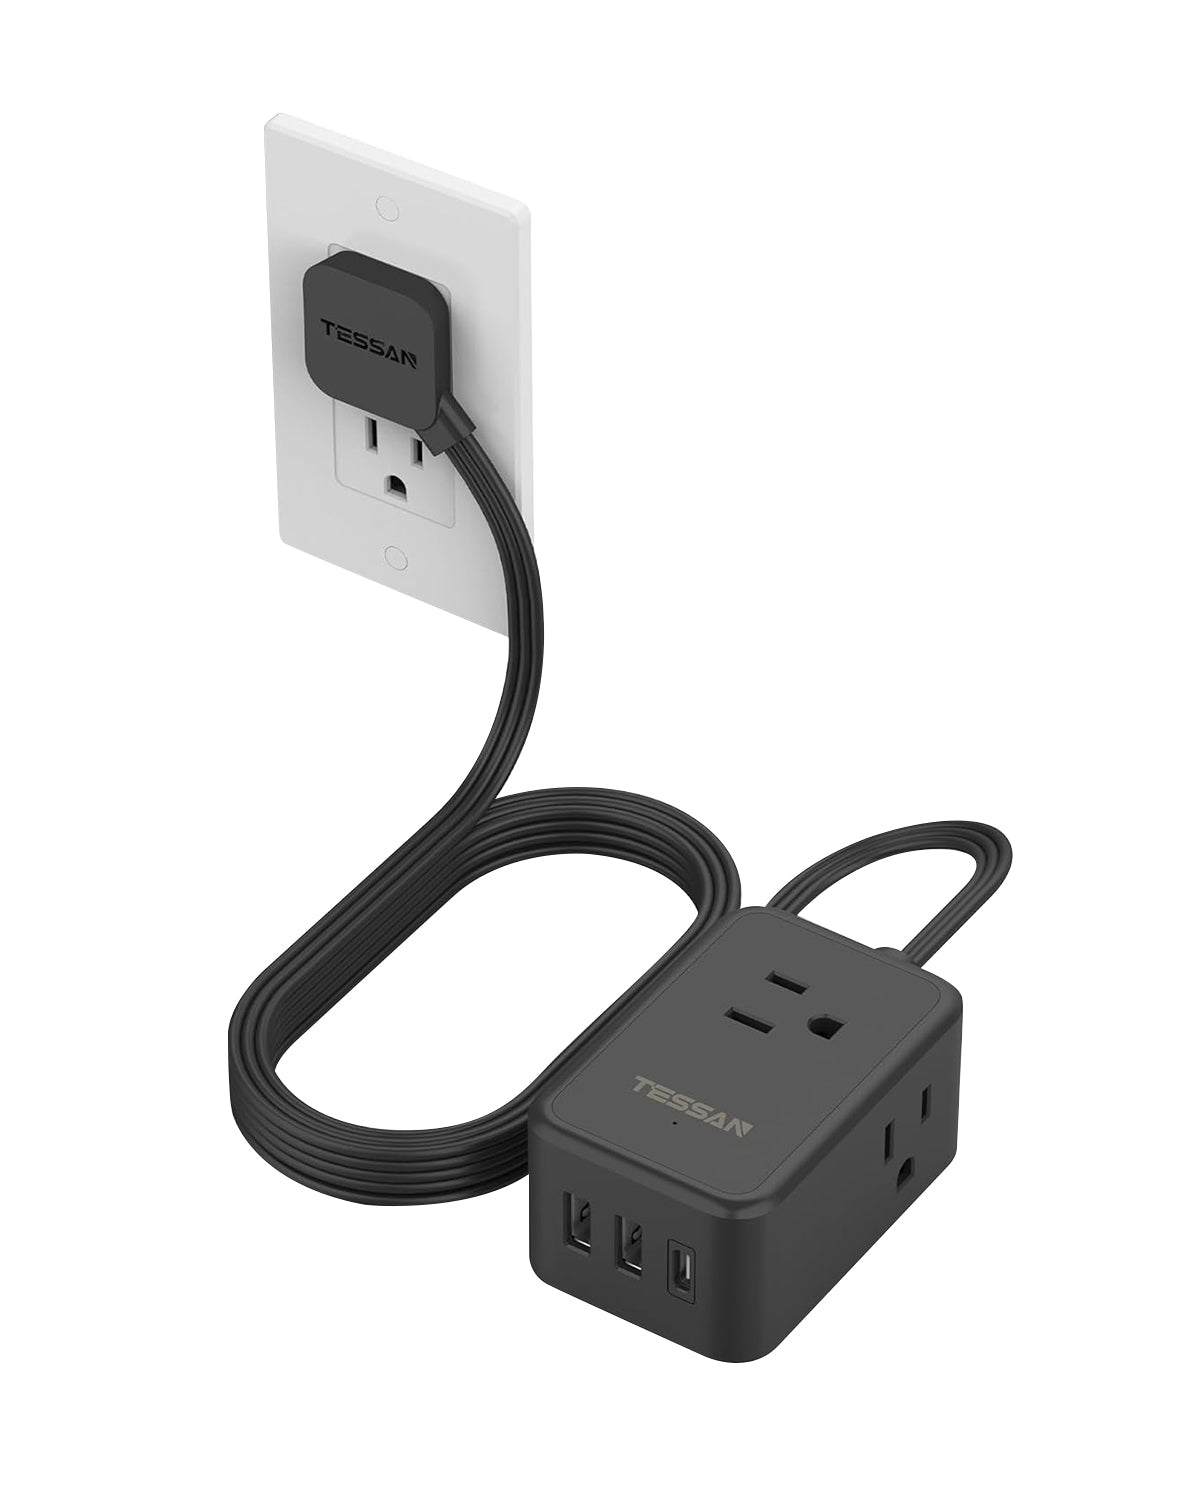 TESSAN Ultra Thin Power Strip with 3 USB Wall Charger (1 USB C), Flat Black Extension Cord